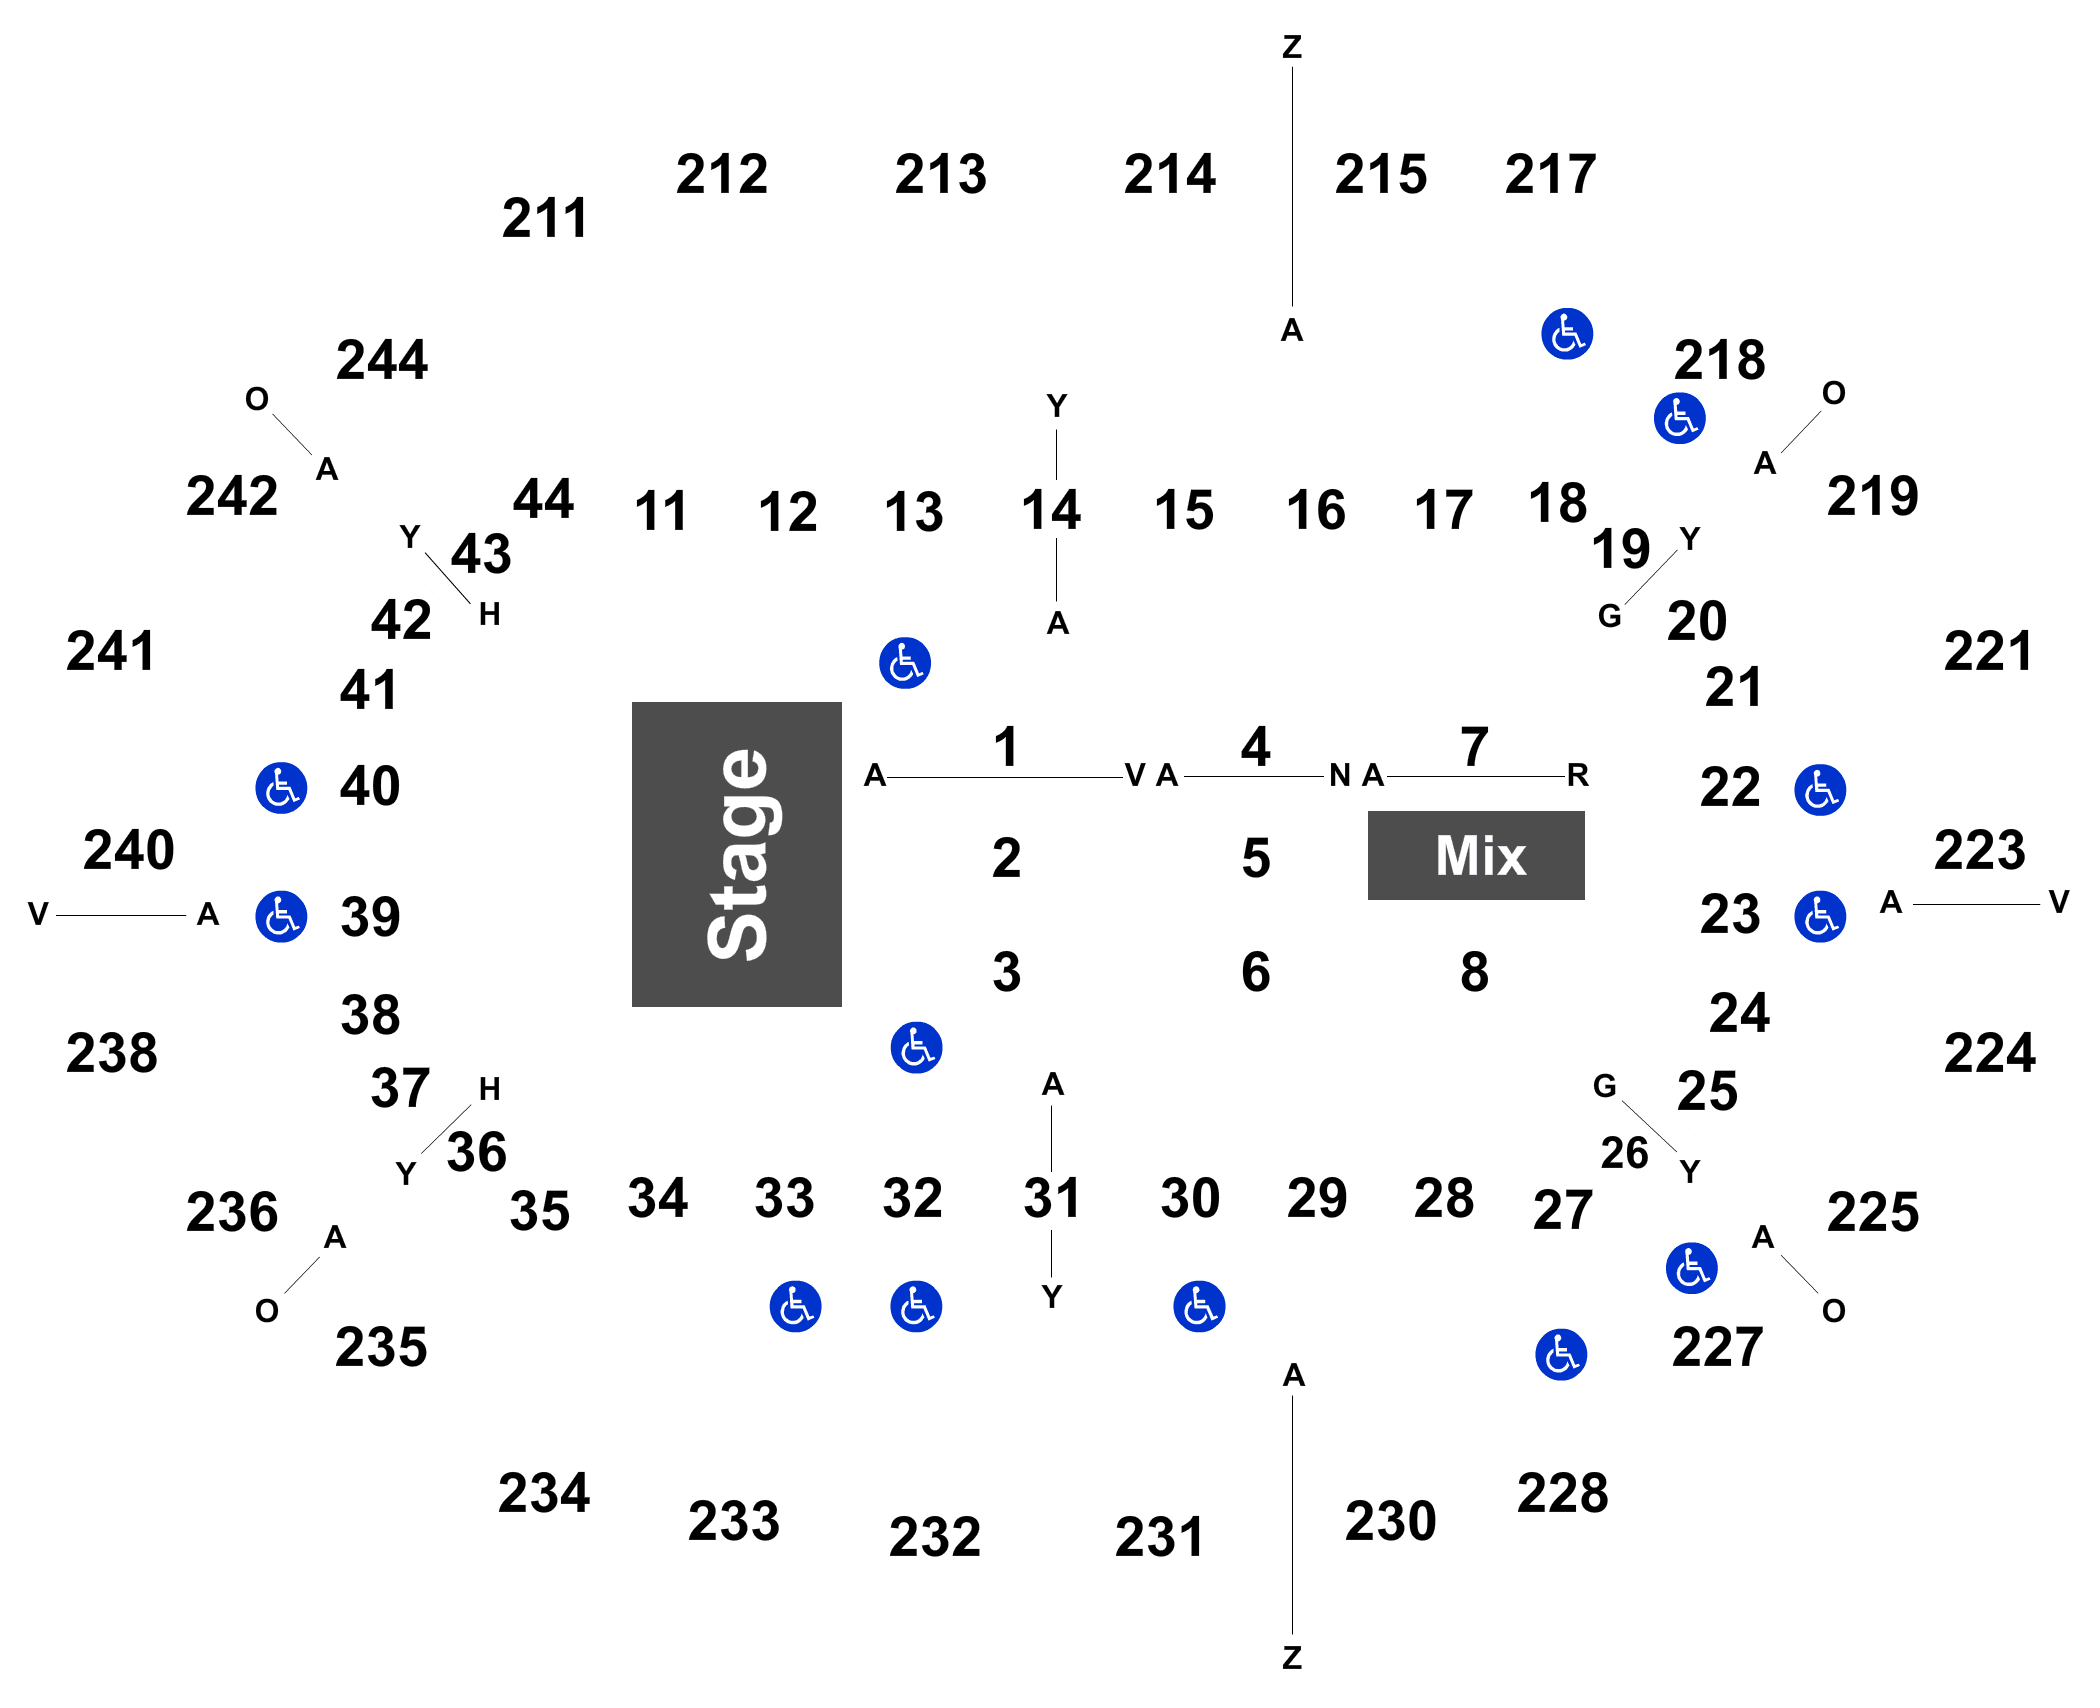 Rupp Arena Seating Chart Concert